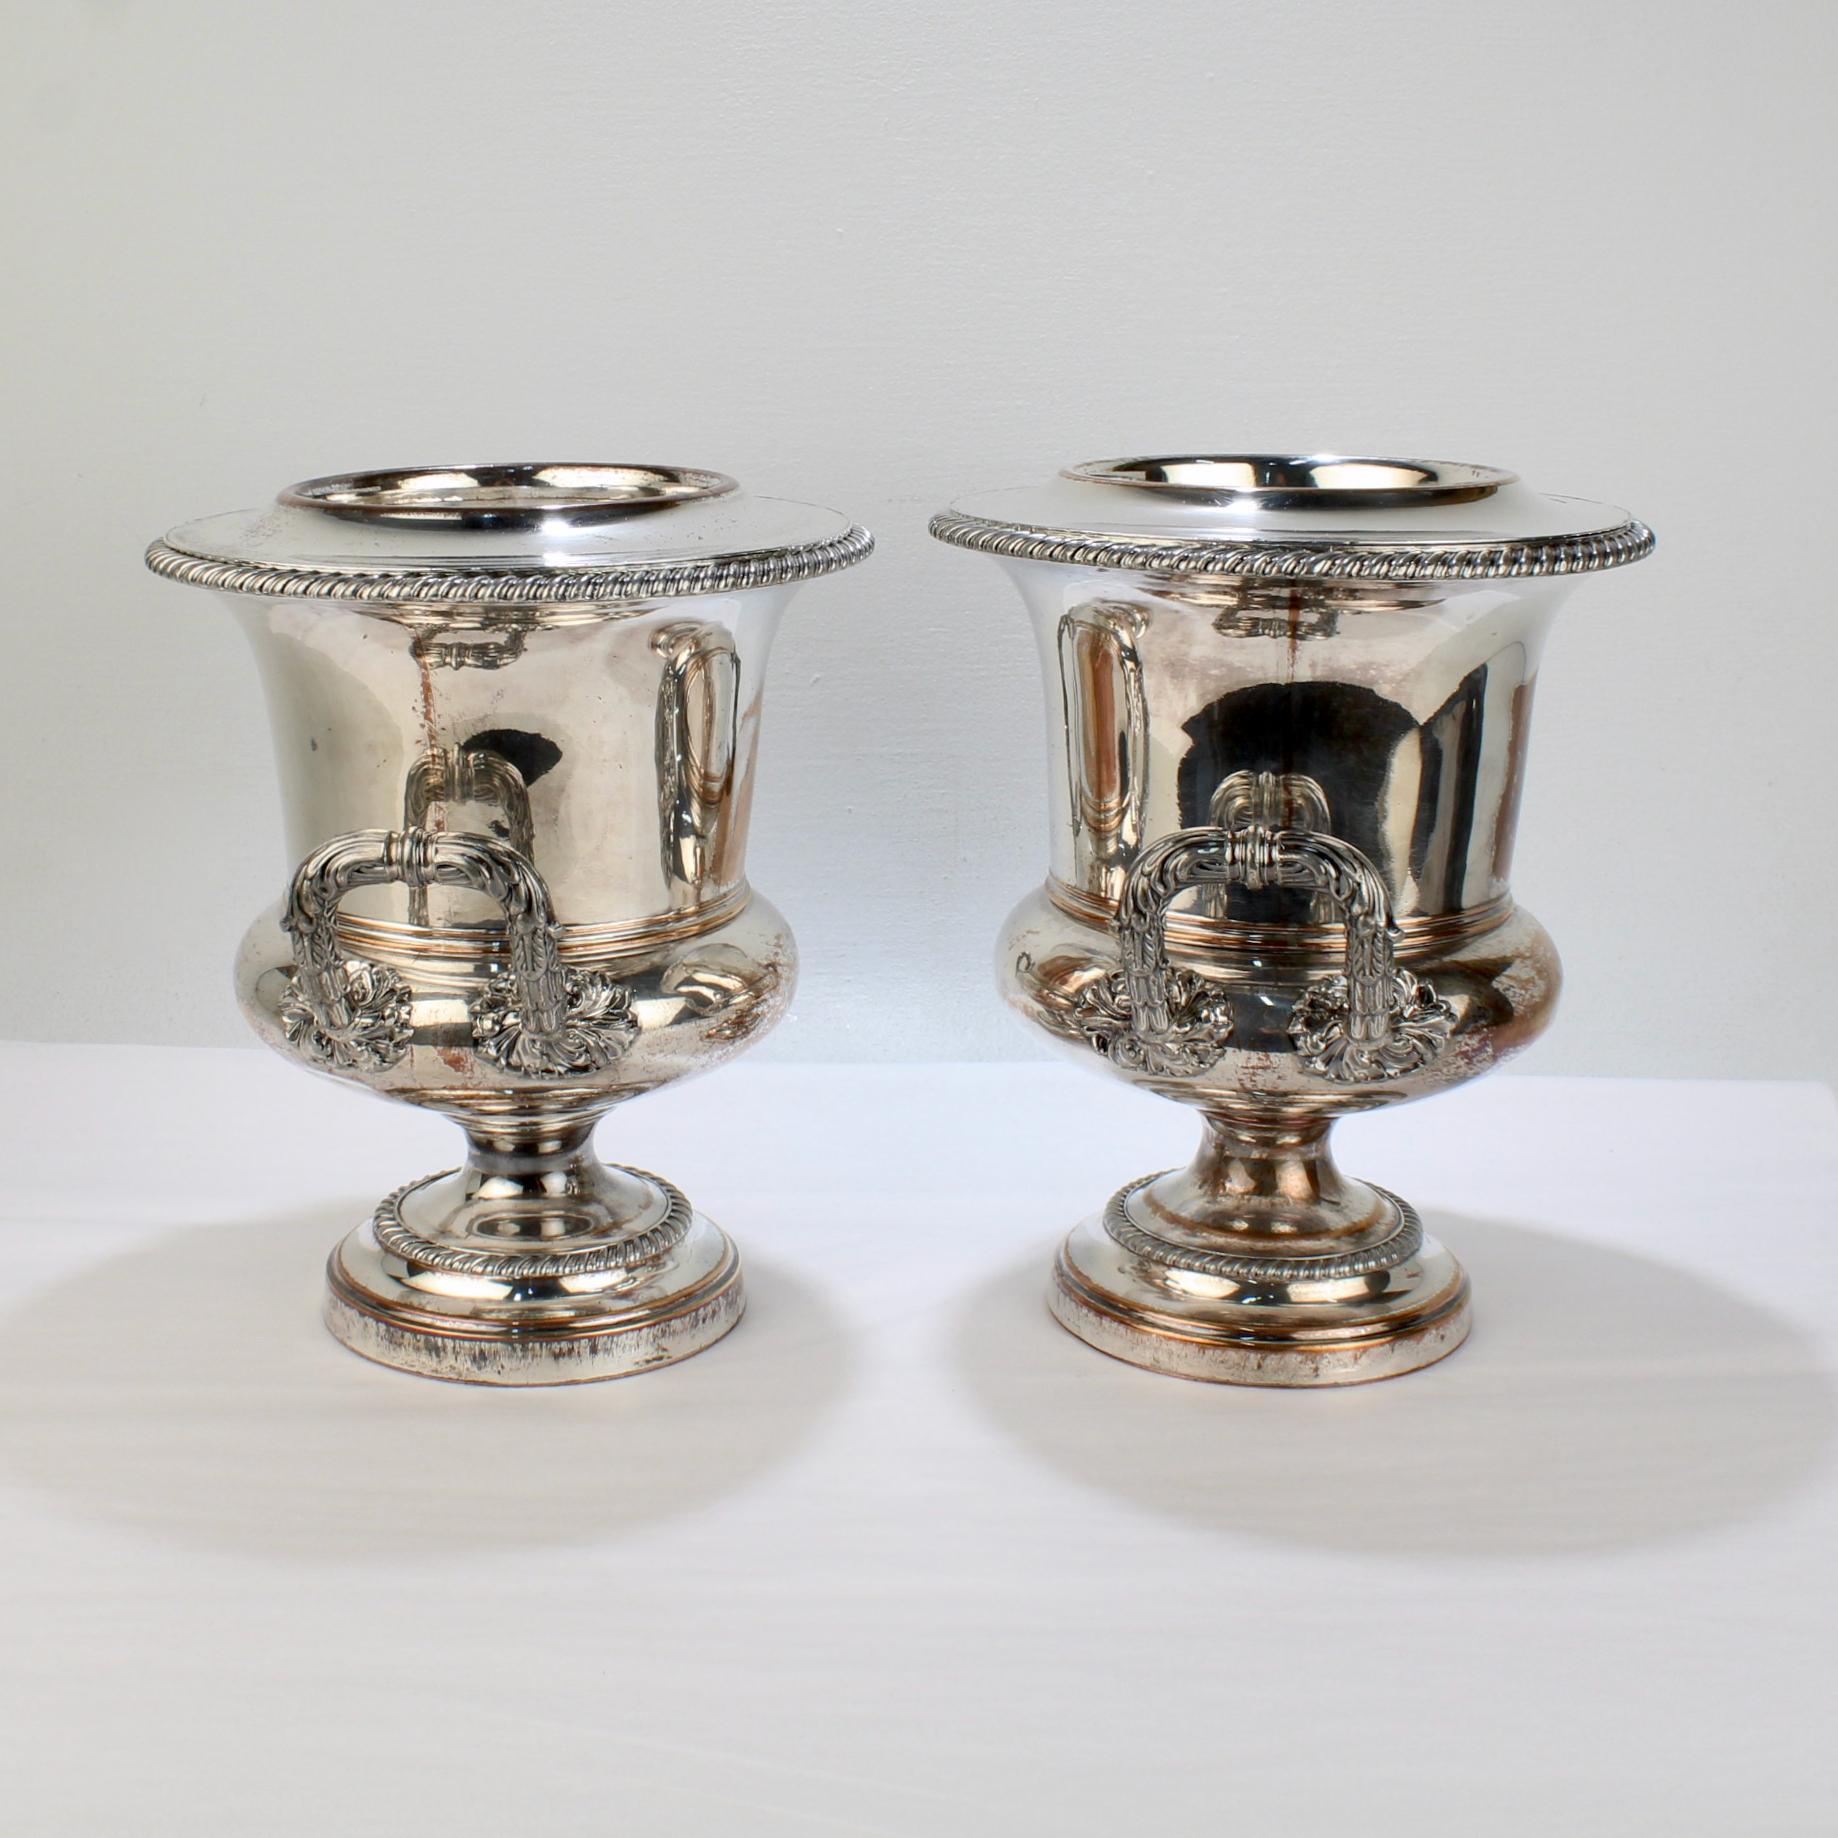 A fine pair of antique English wine coolers. 

Each wine cooler is plated with silver on copper, has a gadrooned top rim, tops and liners that seat fairly well, ornate twin handles, and a stepped trumpet-form base. 

Both have had a crest or